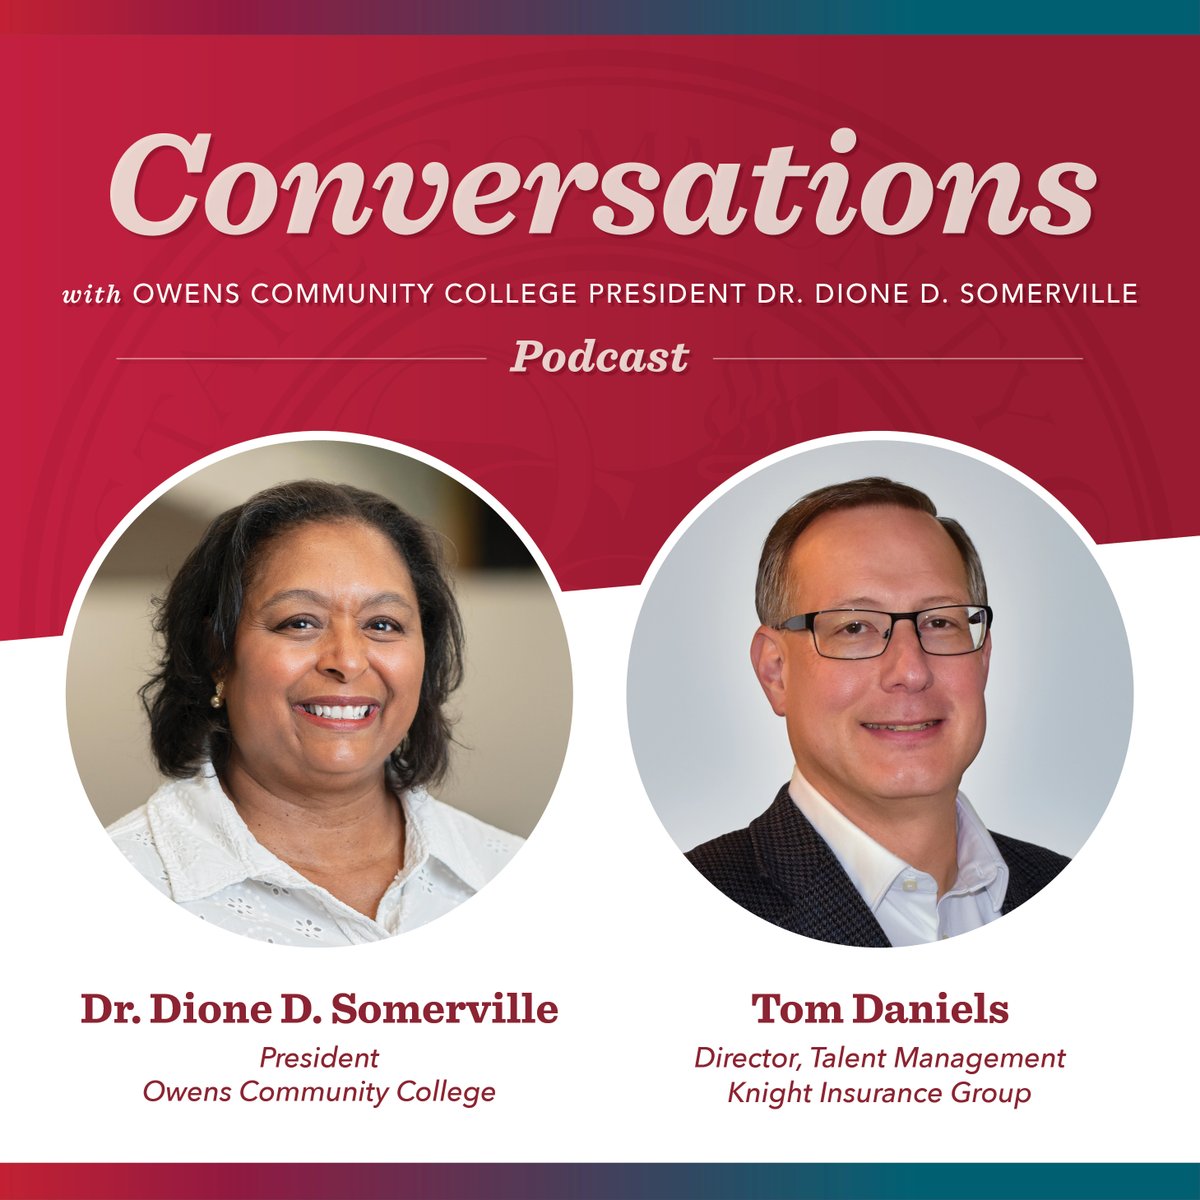 I am so excited to share the newest episode of our award-winning #Conversations Podcast - featuring @OwensCC alum (and @bgsu & @UToledo alum) @tomrdaniels419! Hear his thoughts on what employers want today, his leadership advice, and more. Listen now at rss.com/podcasts/owens…